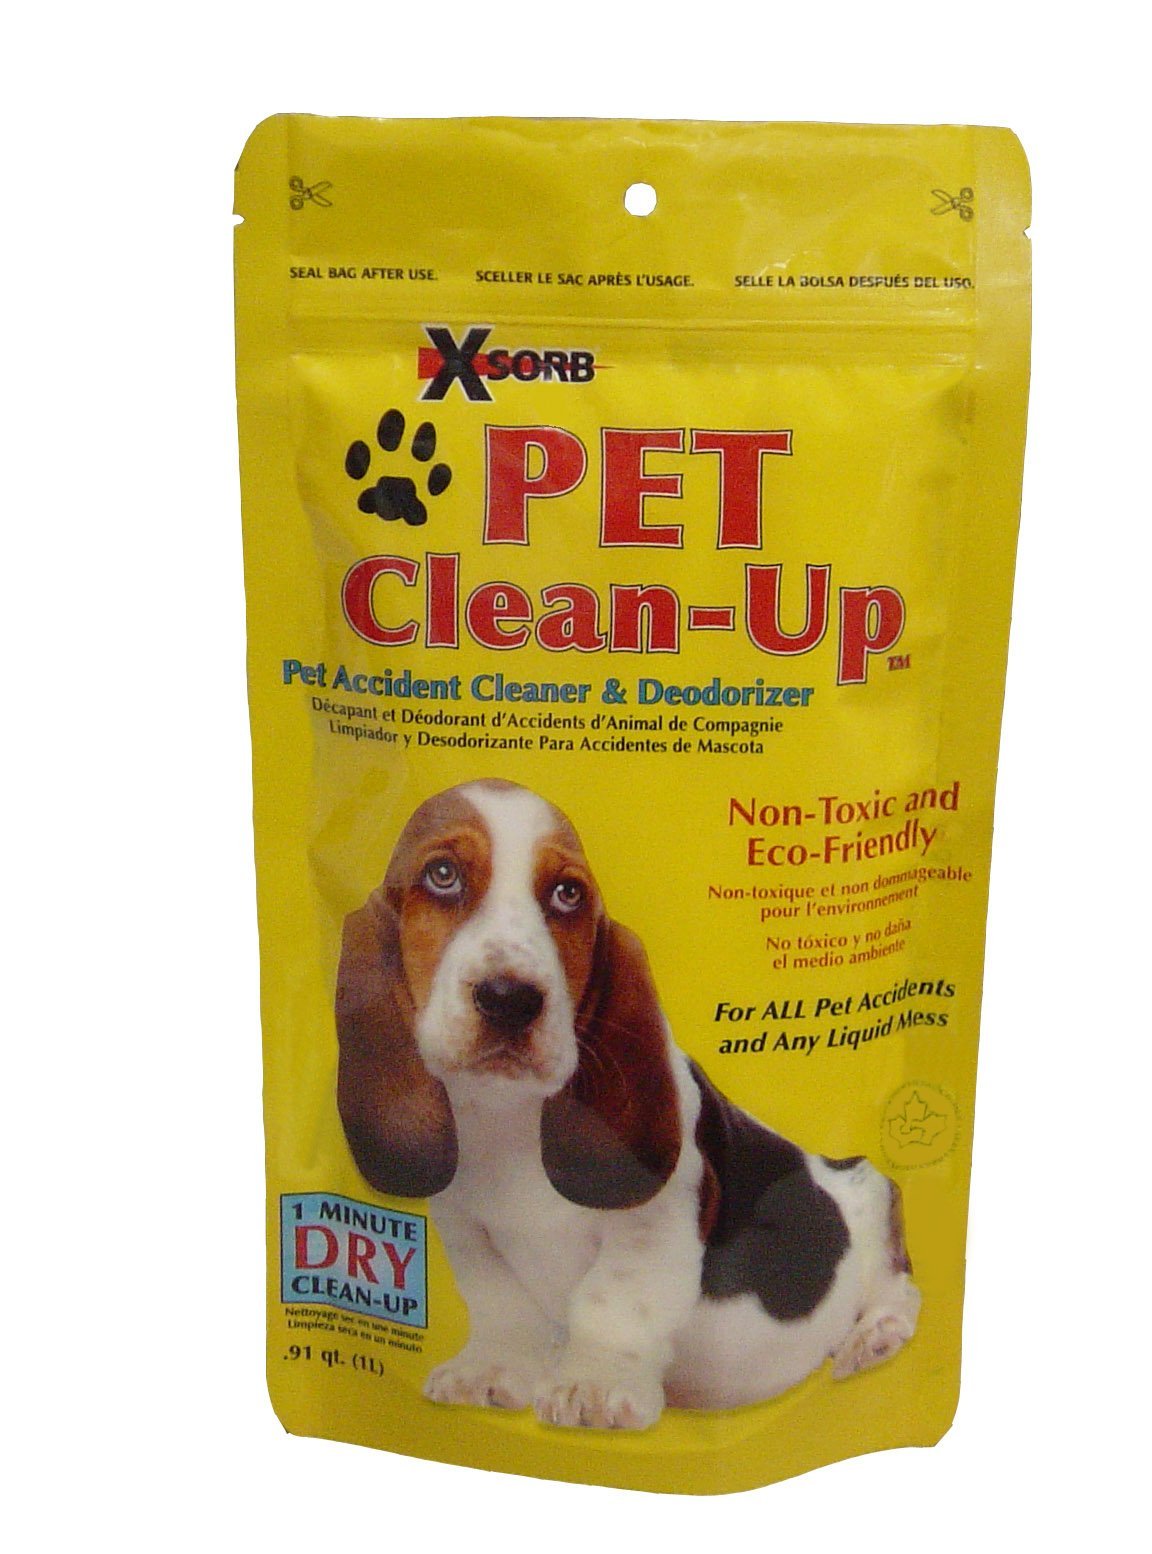 XSORB Pet Accident Clean-Up 1 Liter Bag - 12/CASE